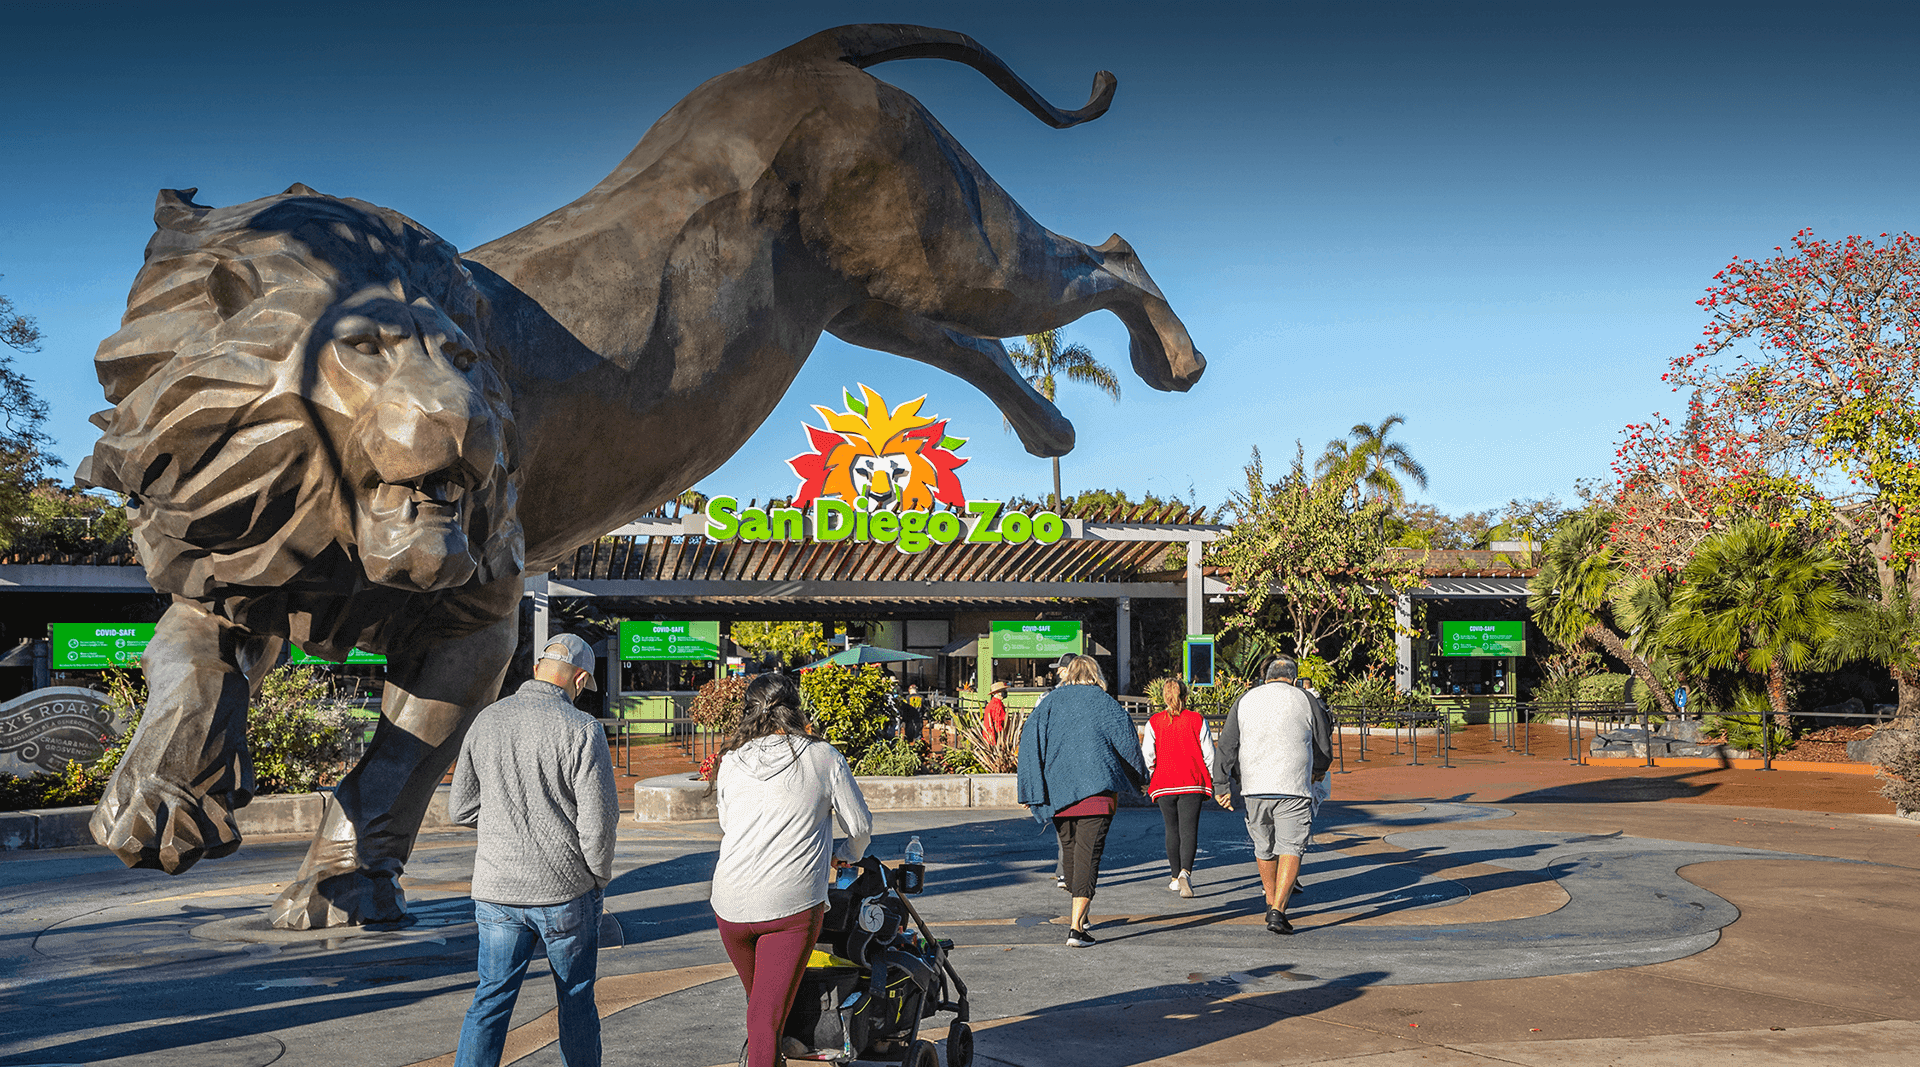 Image of the entrance to the San Diego Zoo, including a large statue of a leaping lion.